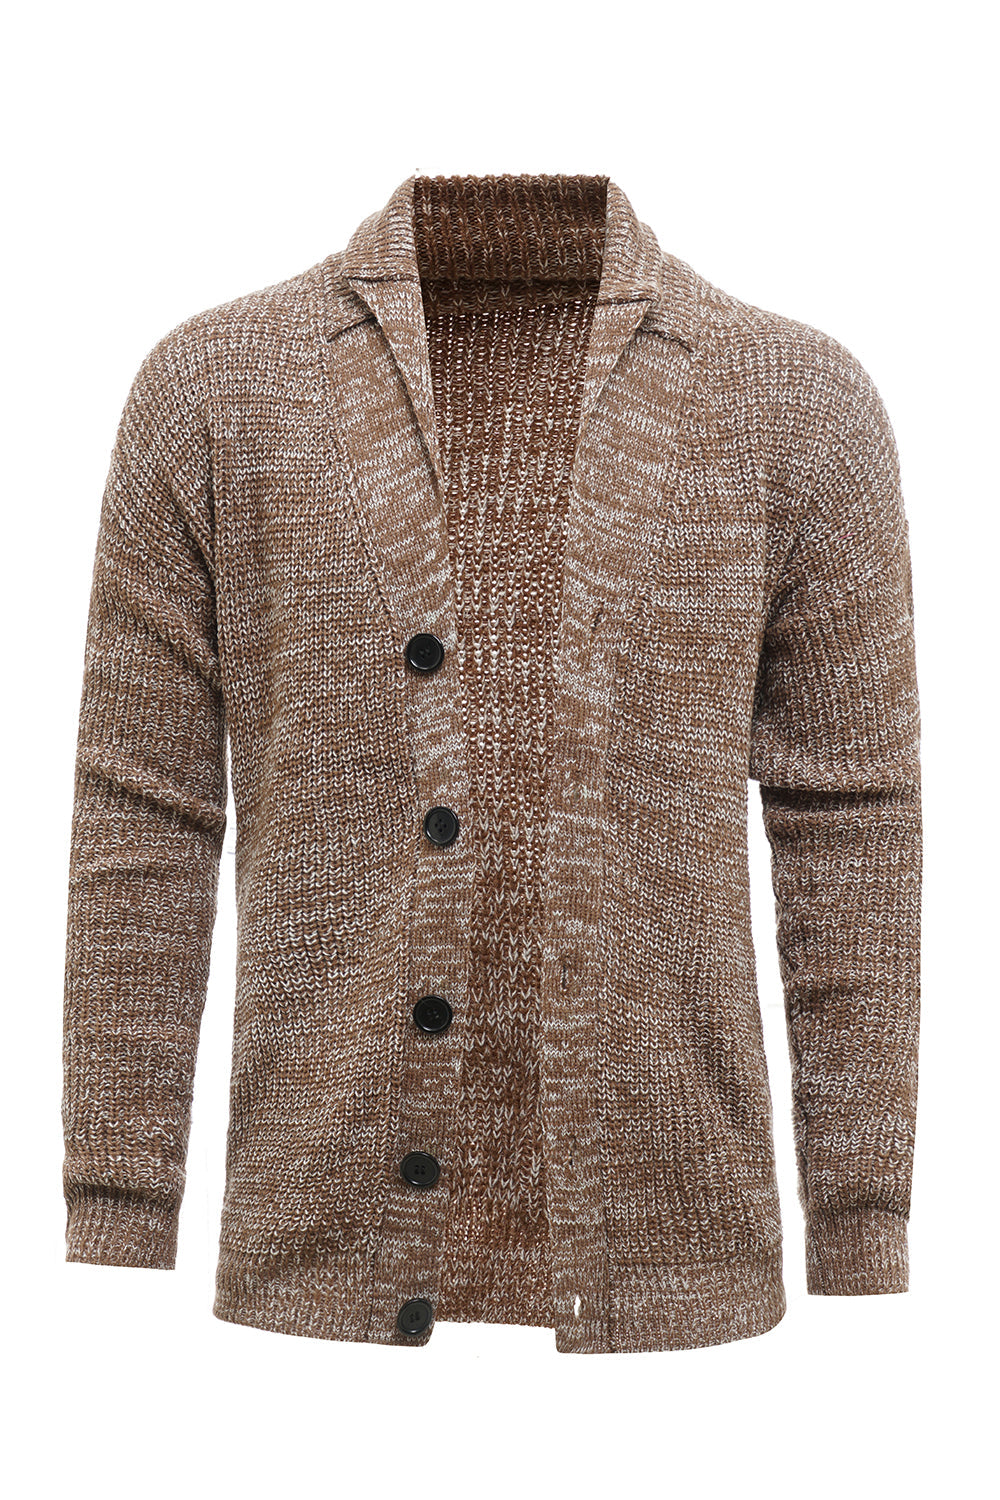 Châle kaki Col Manches Longues Loose Fit Homme Cardigan Pull